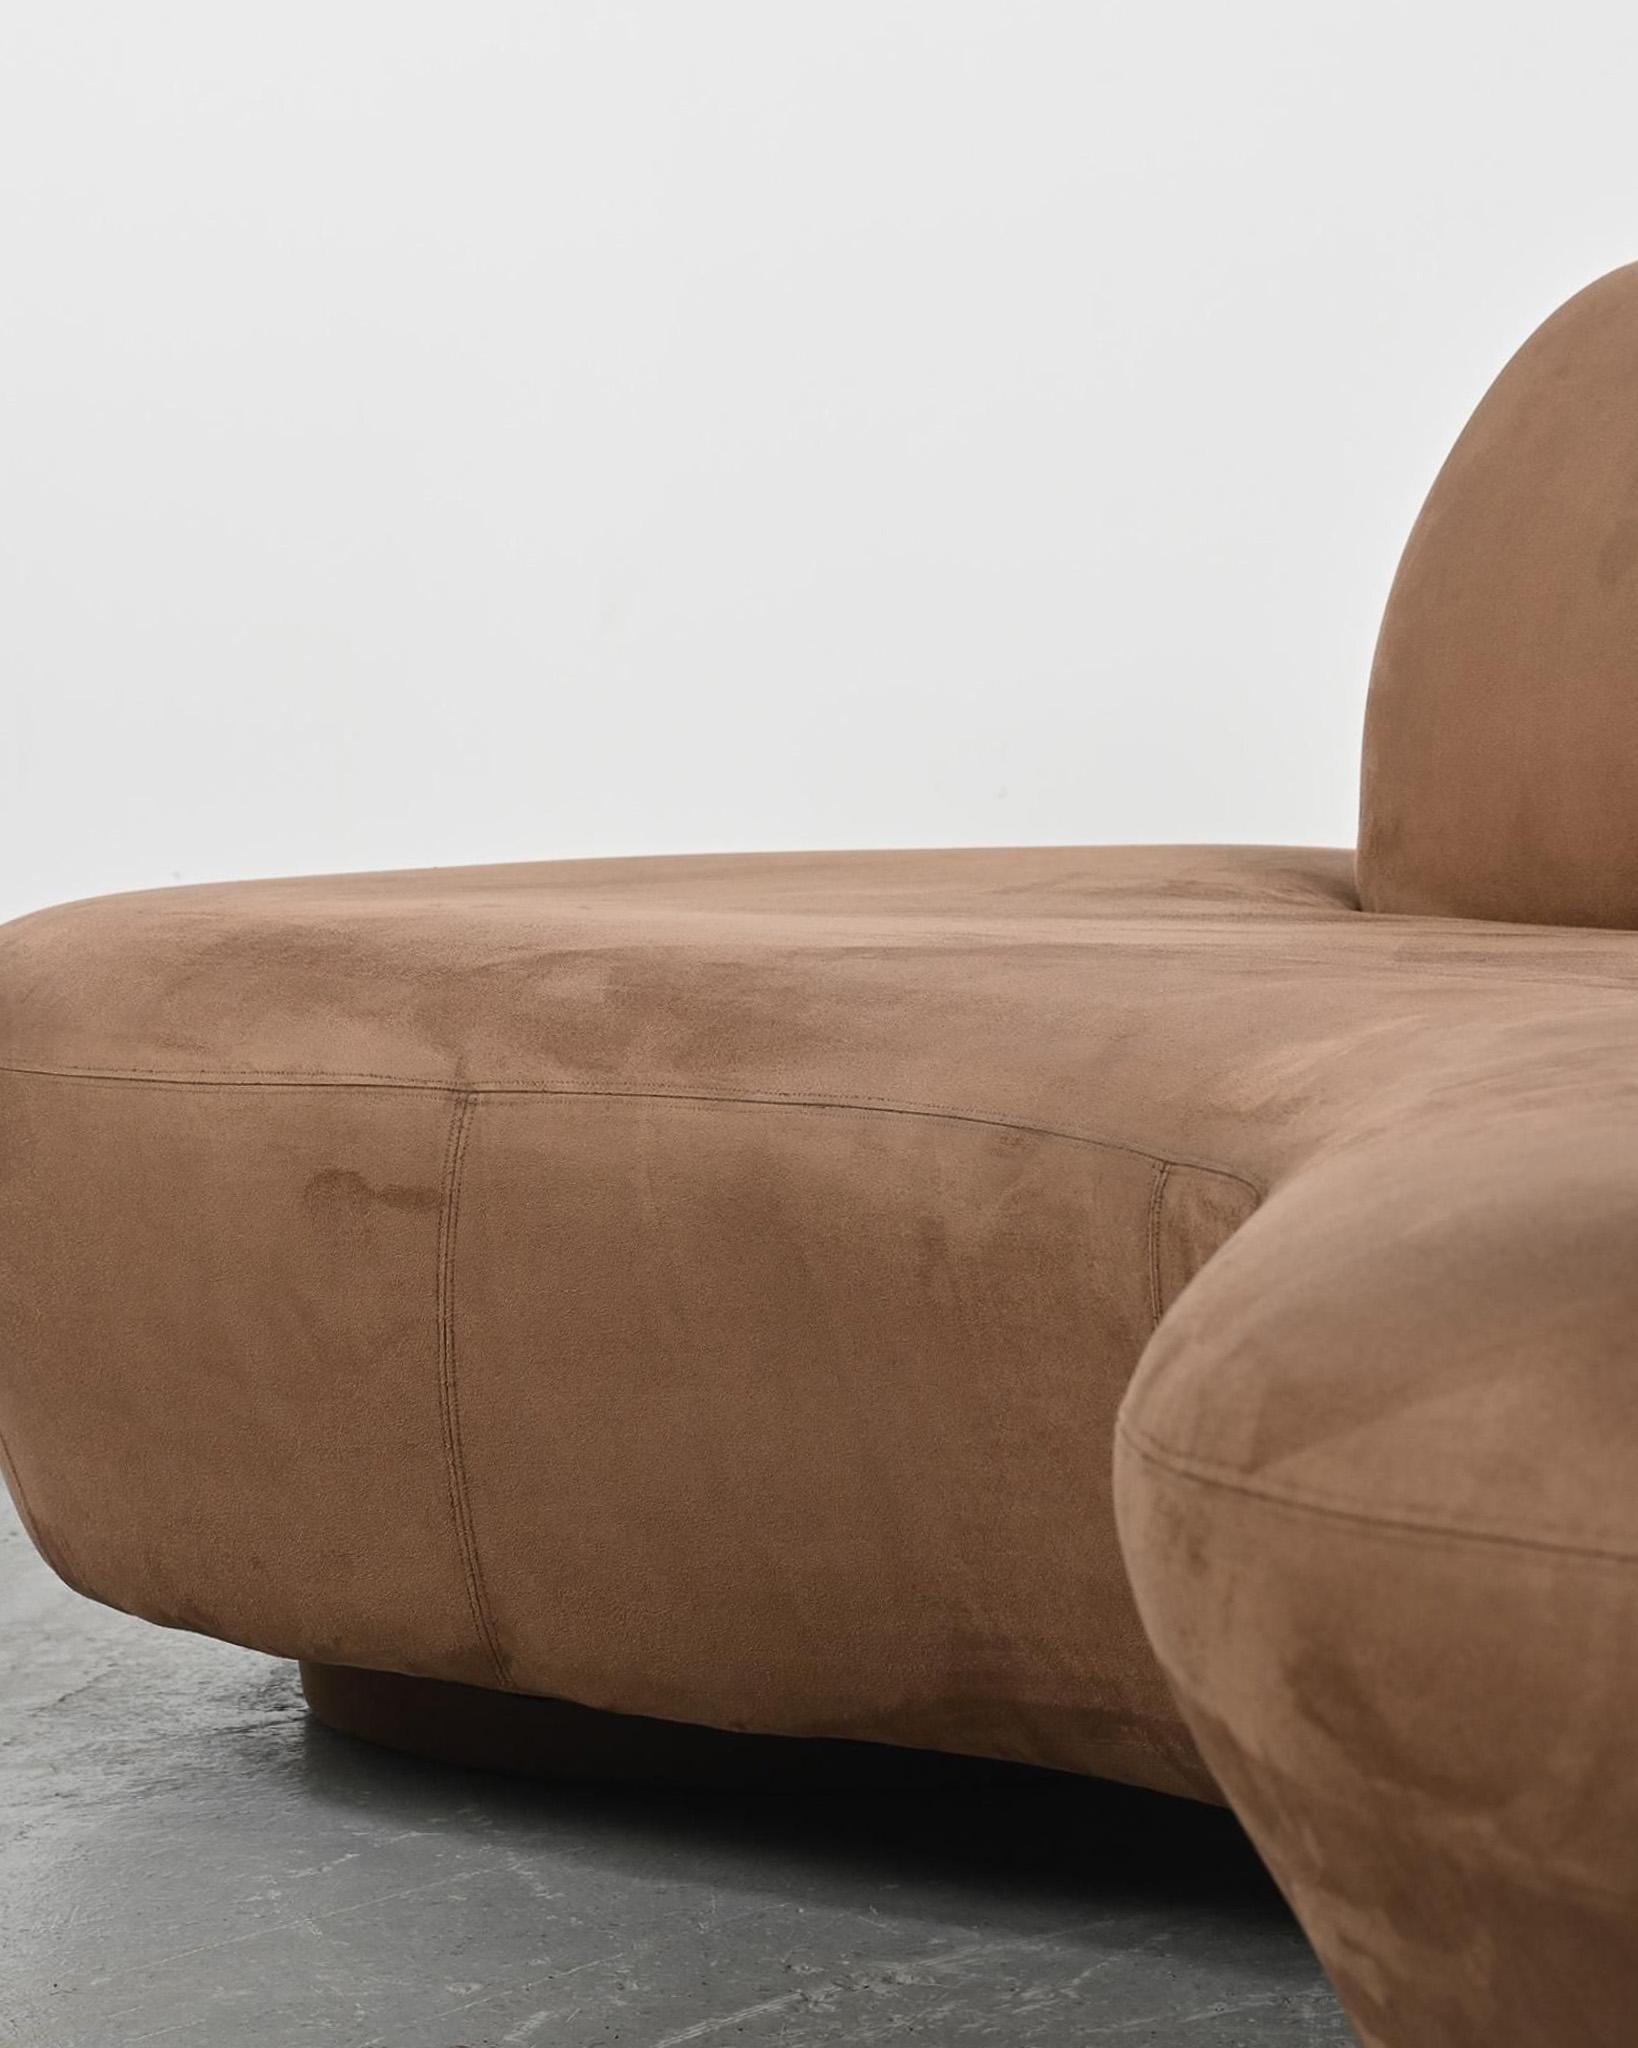 Vladimir Kagan Curved Free Form Styled Sofa in Suede Upholstery, 1990s For Sale 3